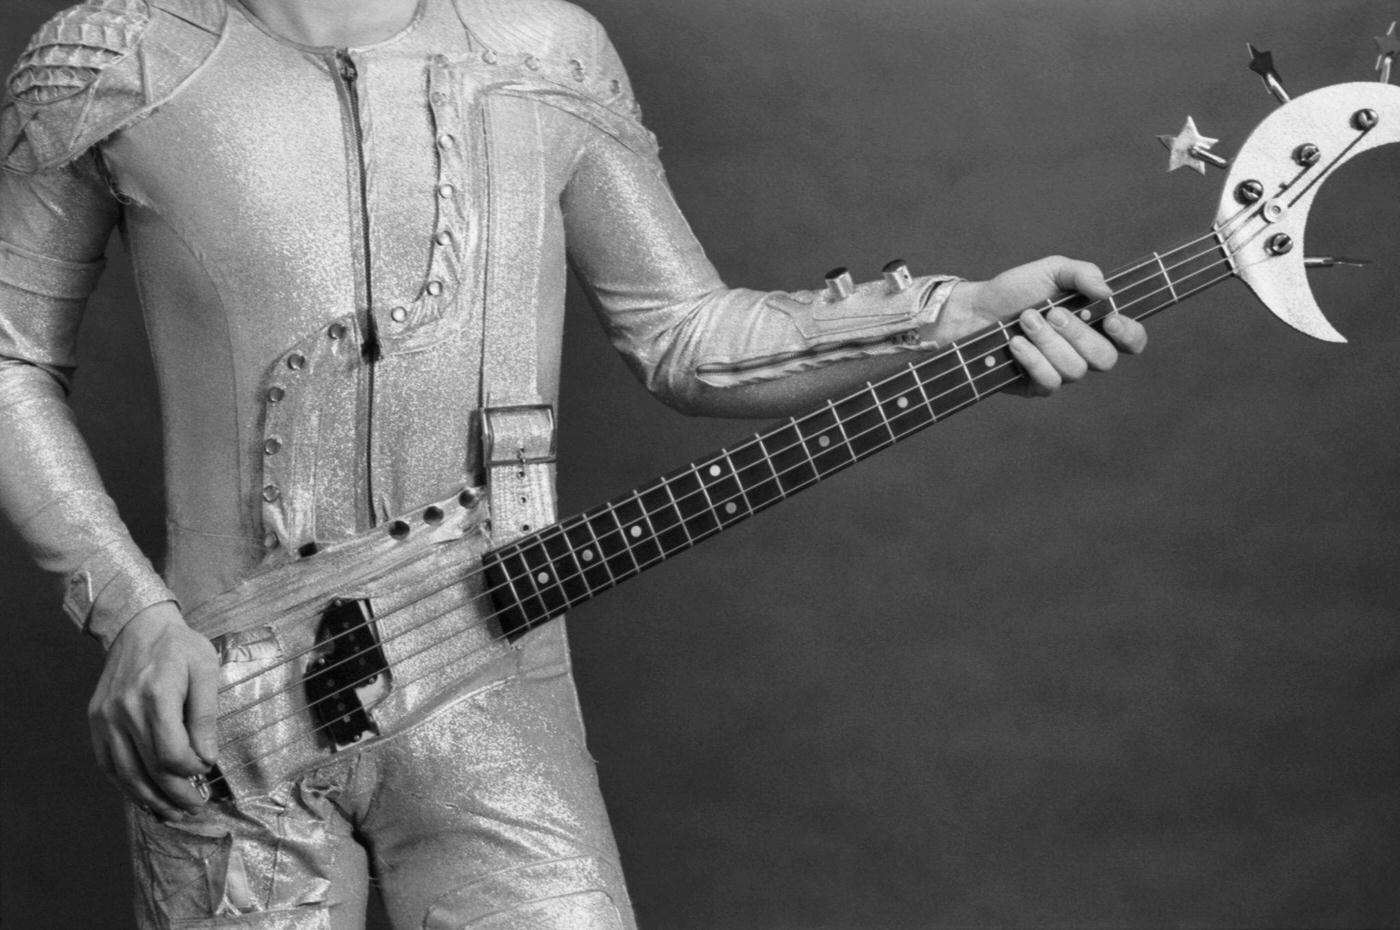 'The Sound Suit', combining a body suit single apparel with an electric bass guitar fitted into its pelvic pocket